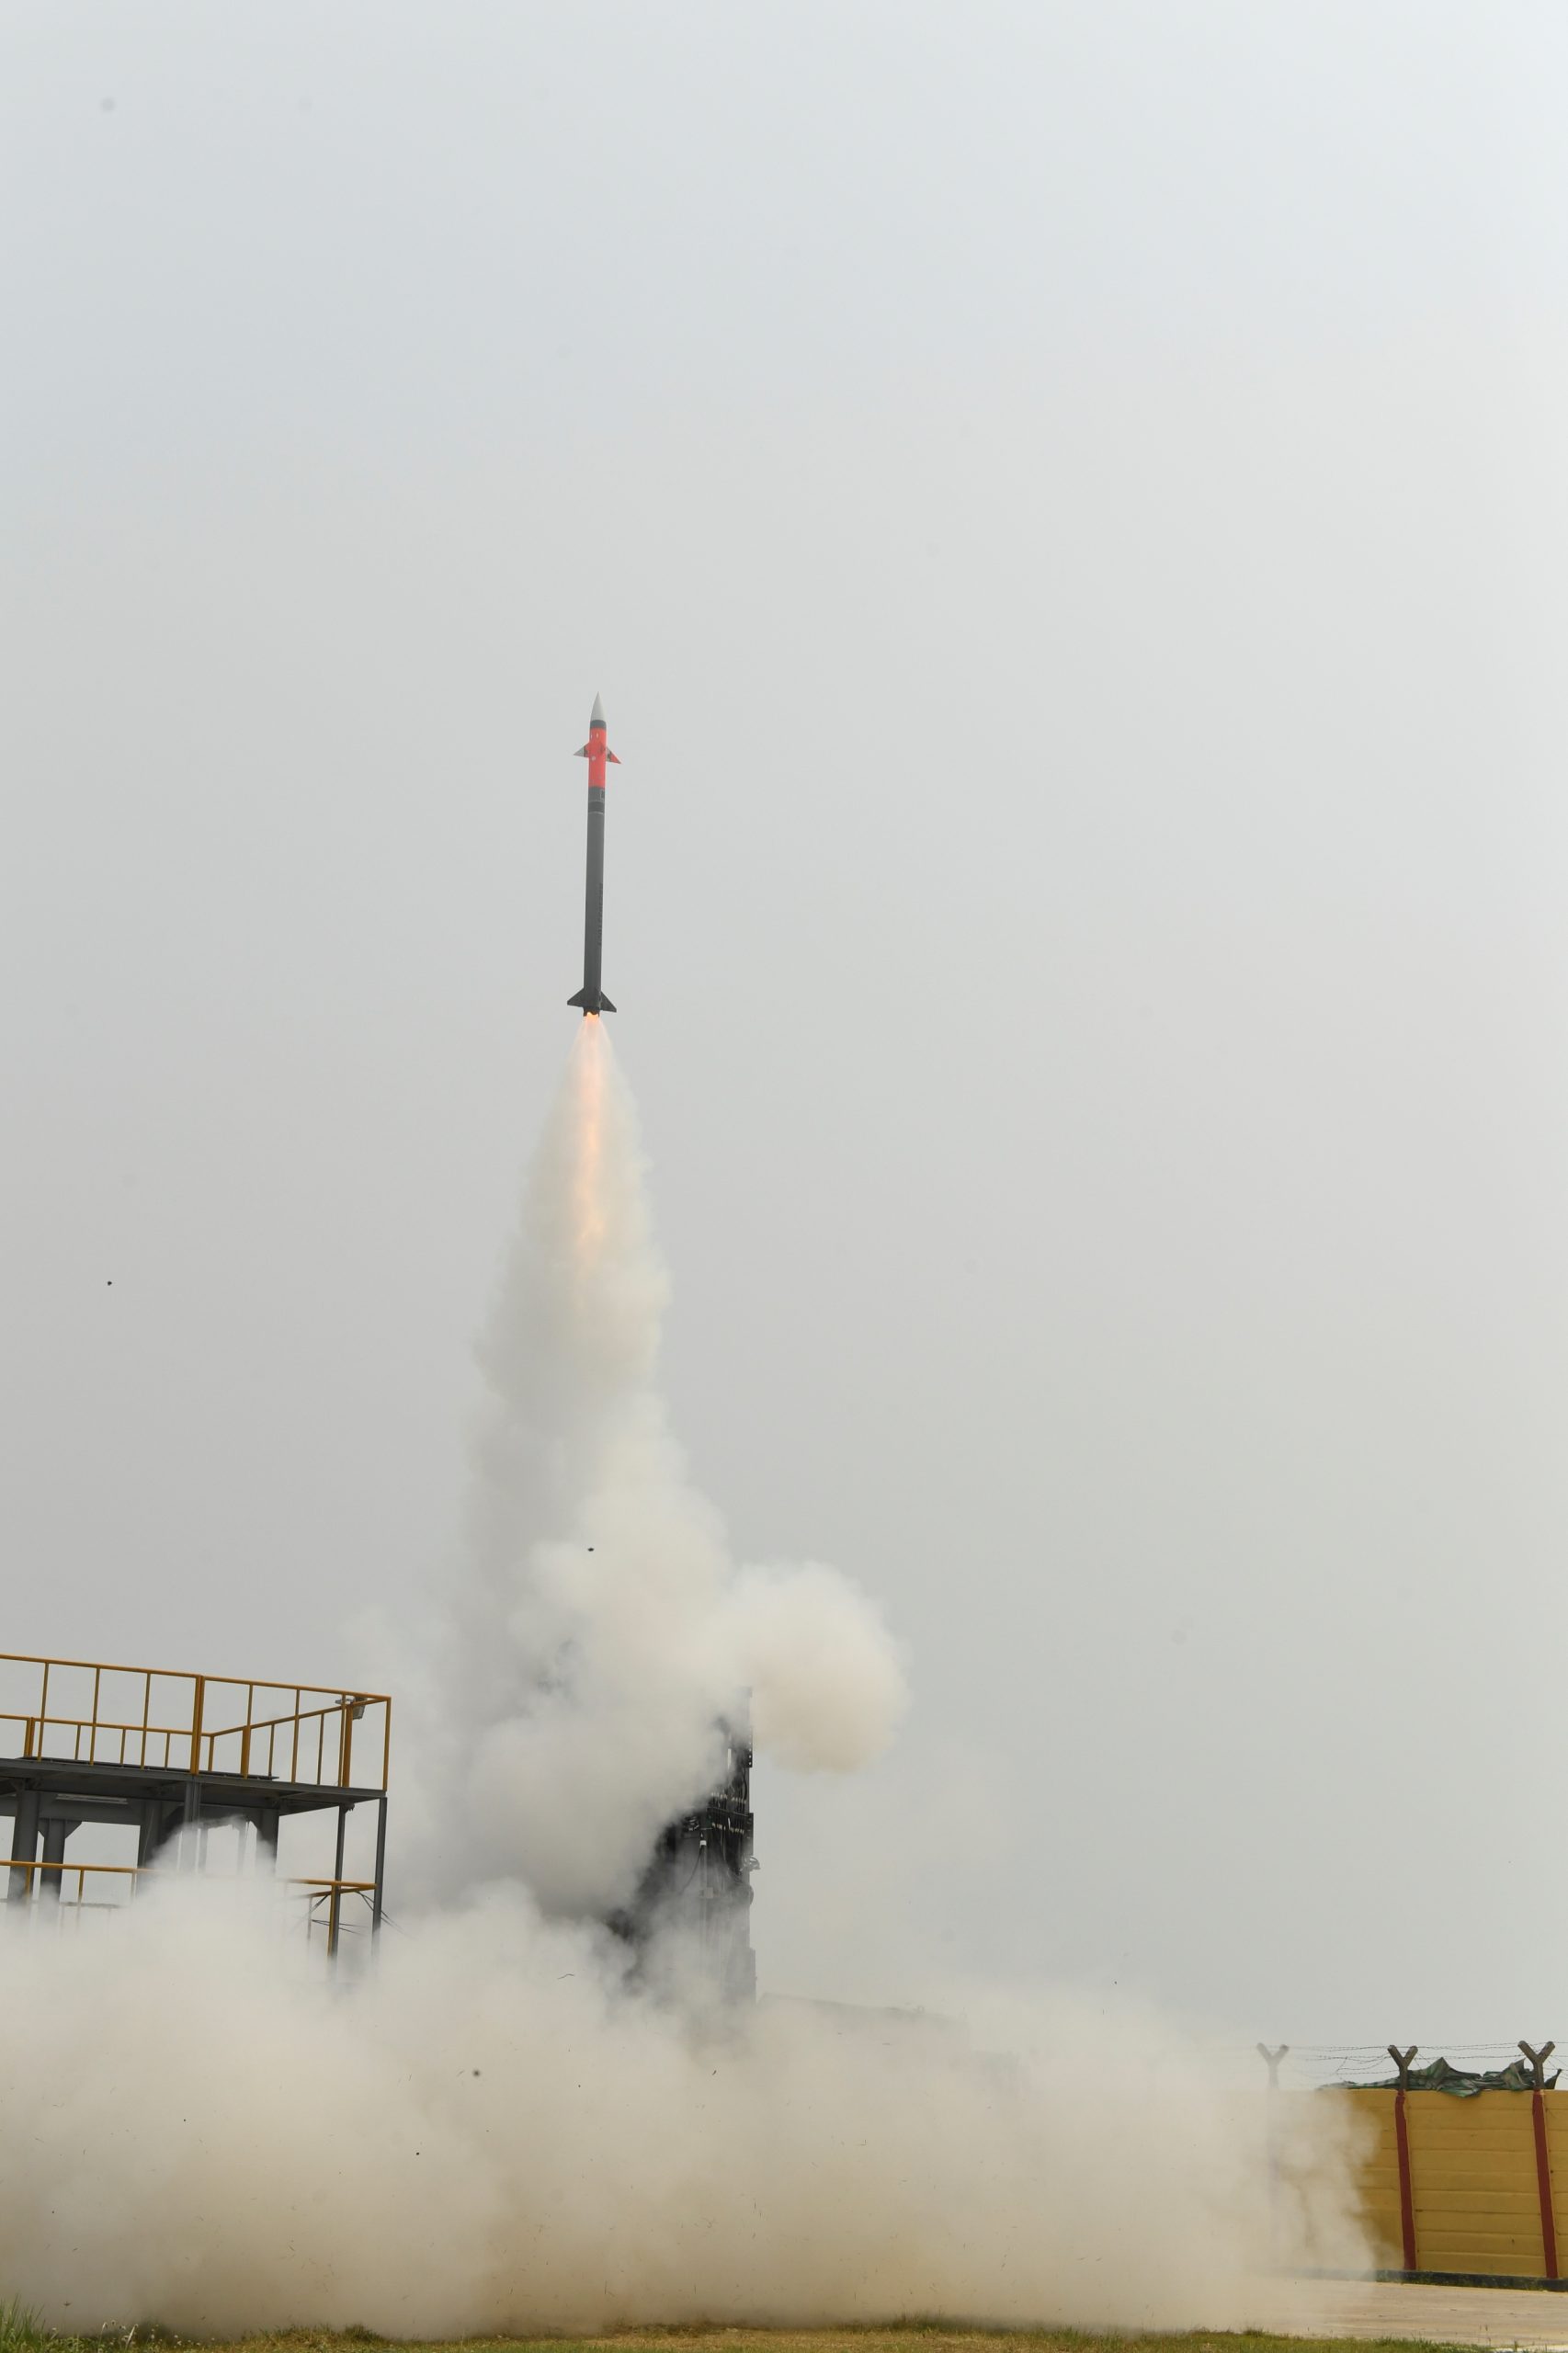 Army variant of Medium Range Surface-to-Air Missile system completes development trials